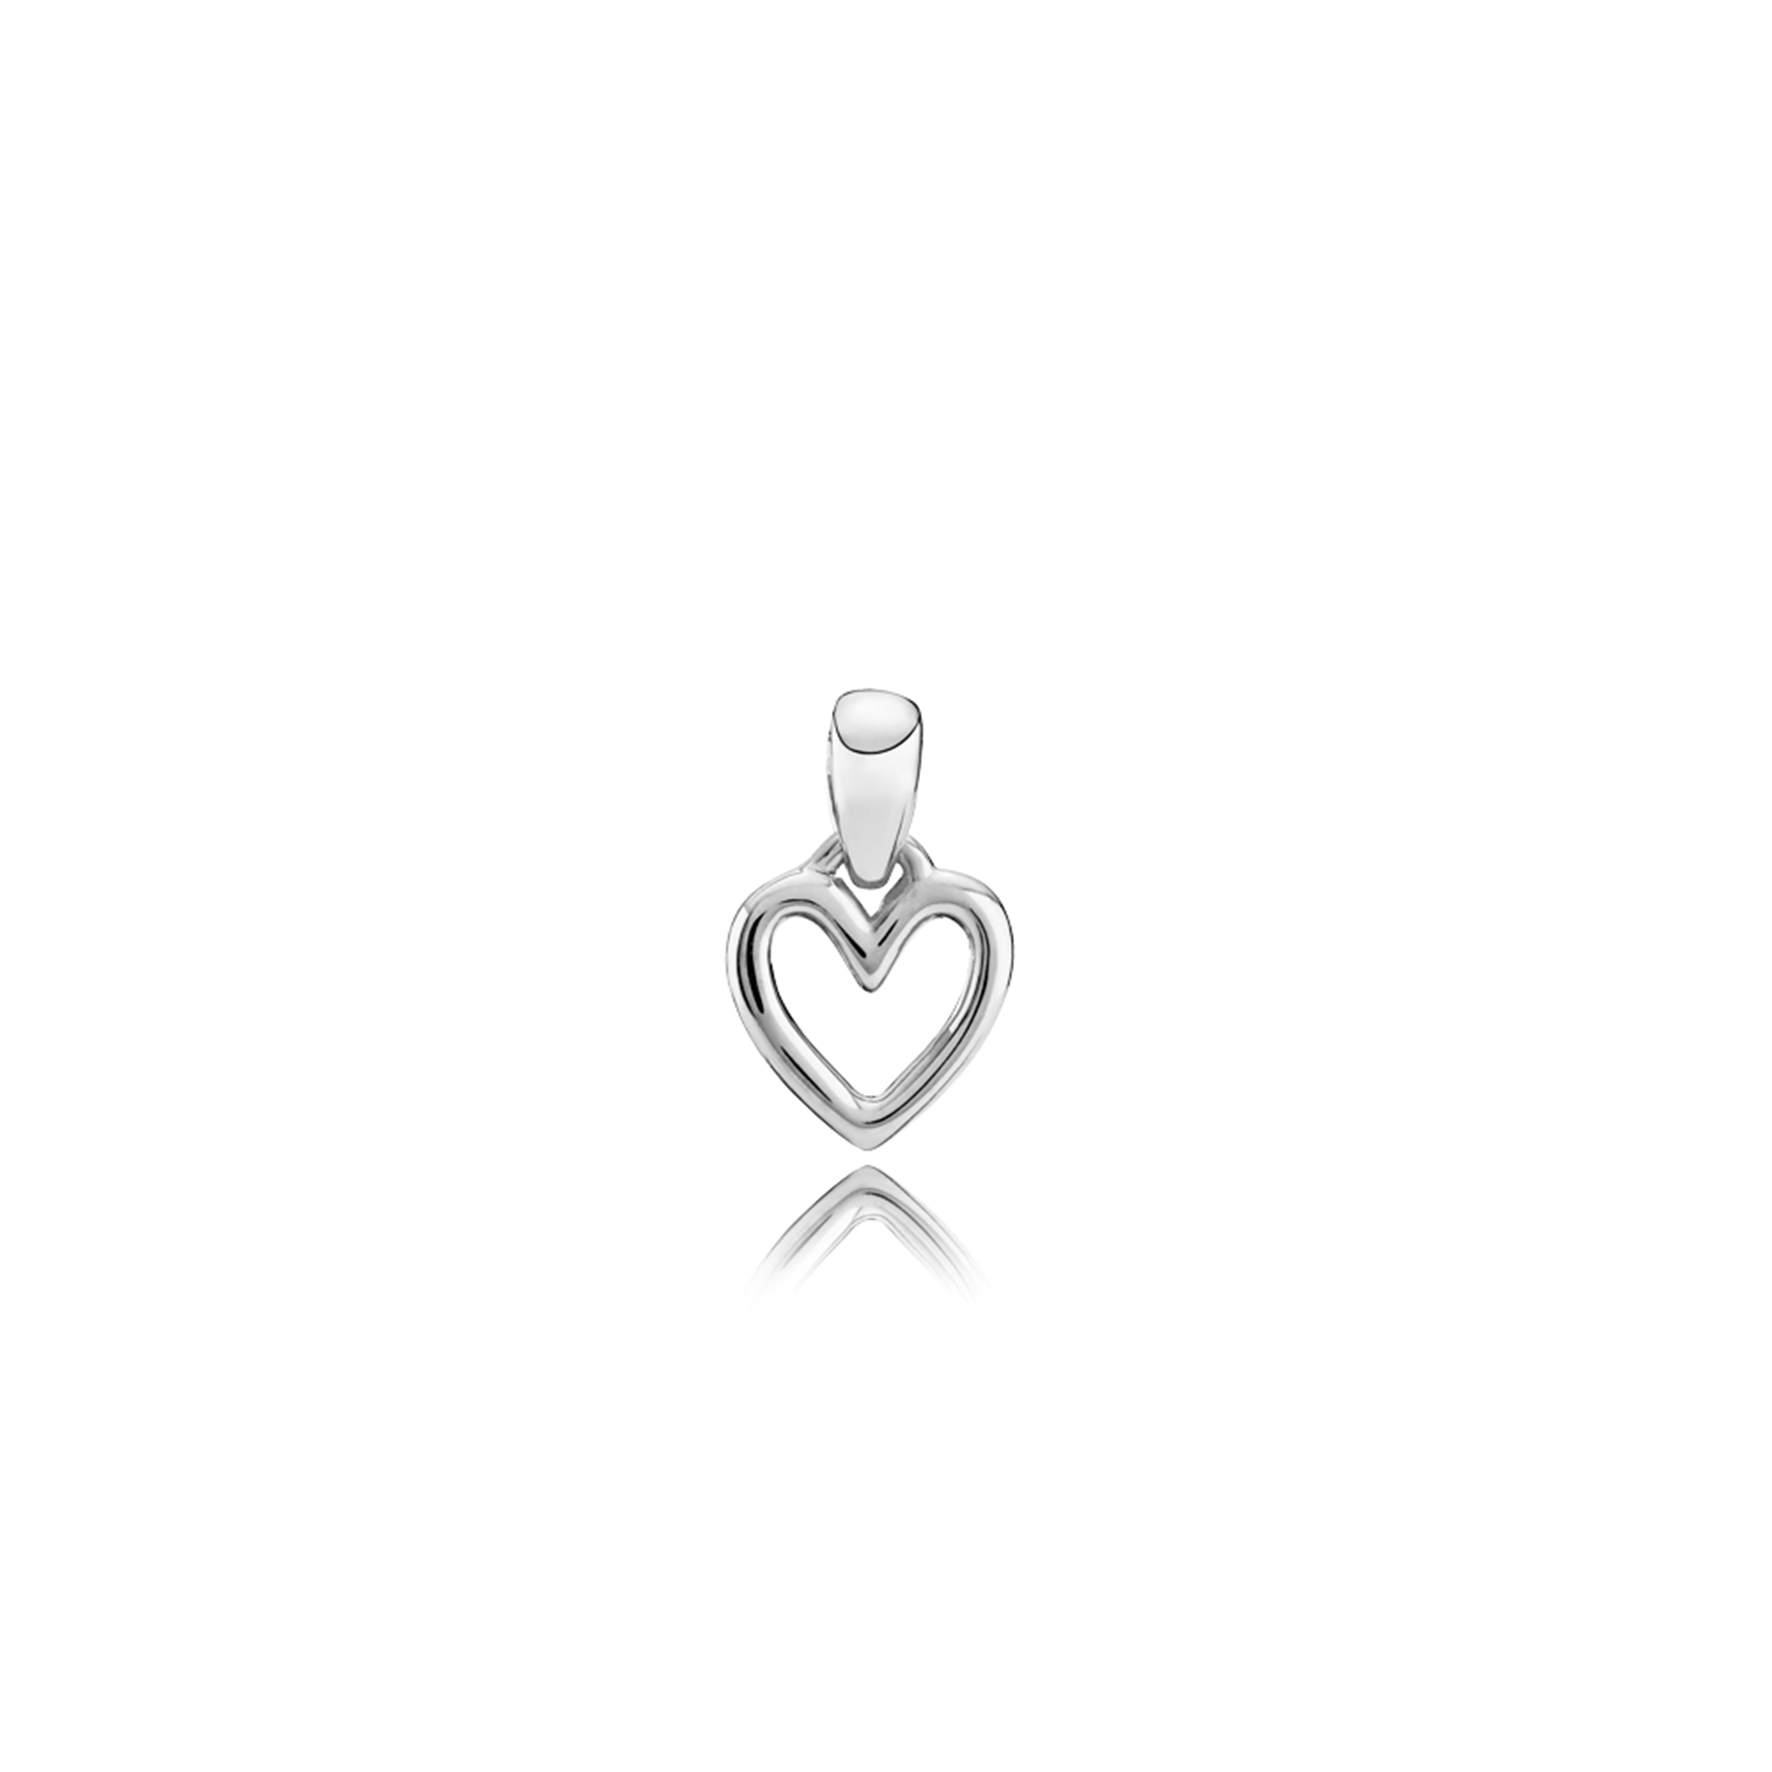 Love Charity Pendant from Izabel Camille in Silver Sterling 925